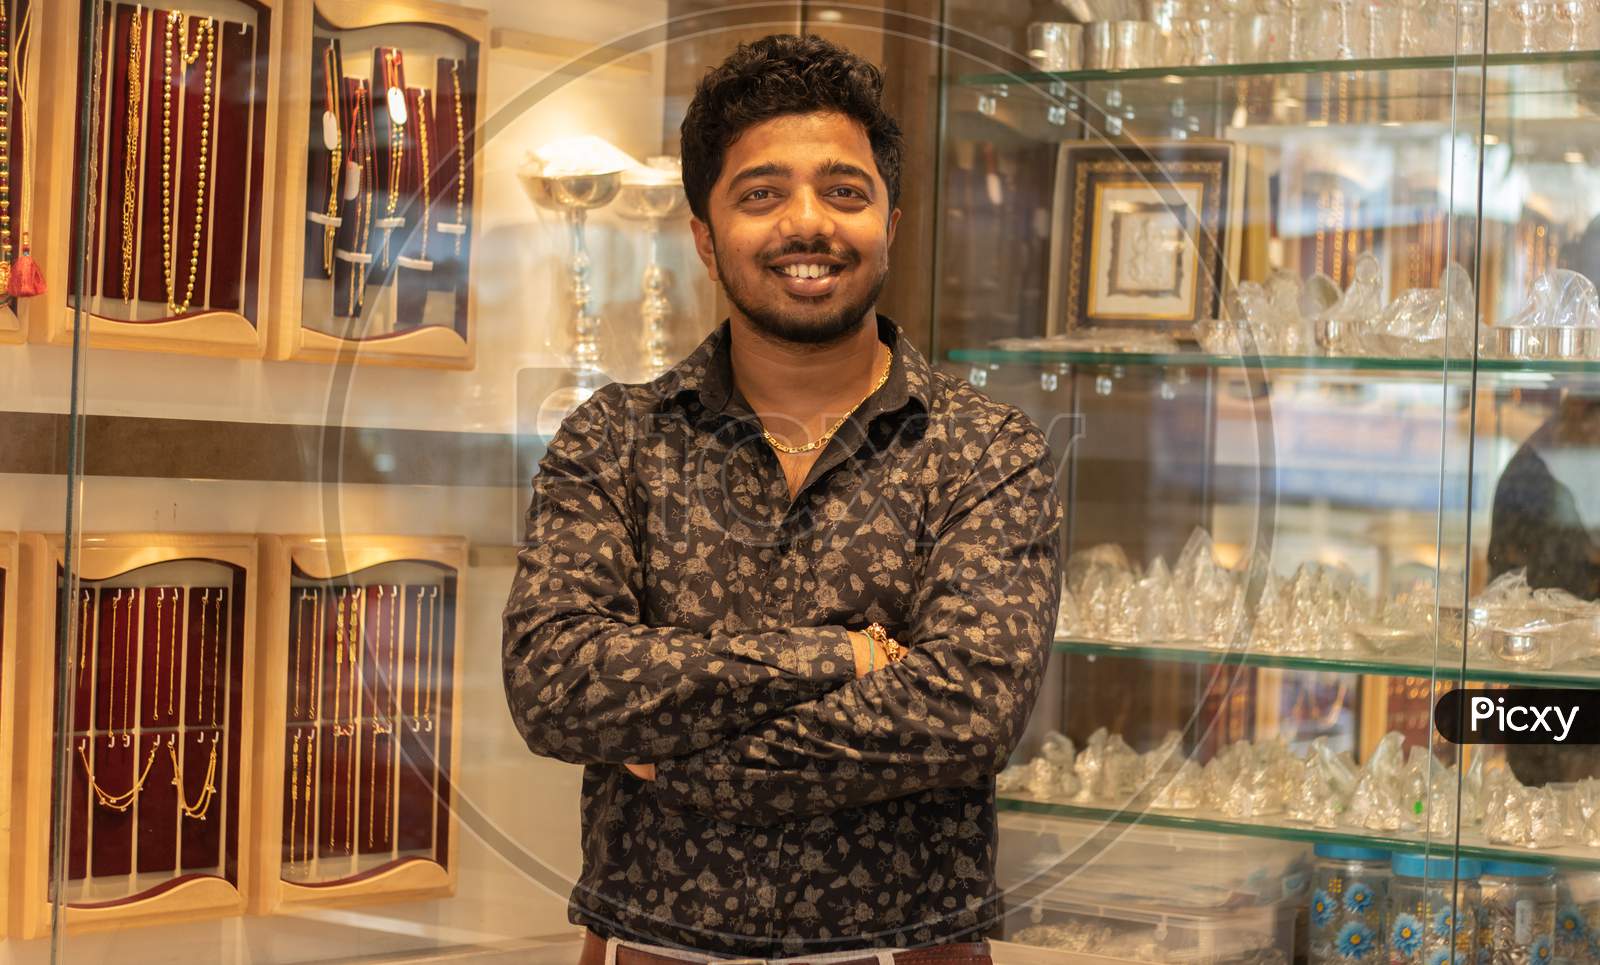 A Young Man/Person in a Jewellery Shop